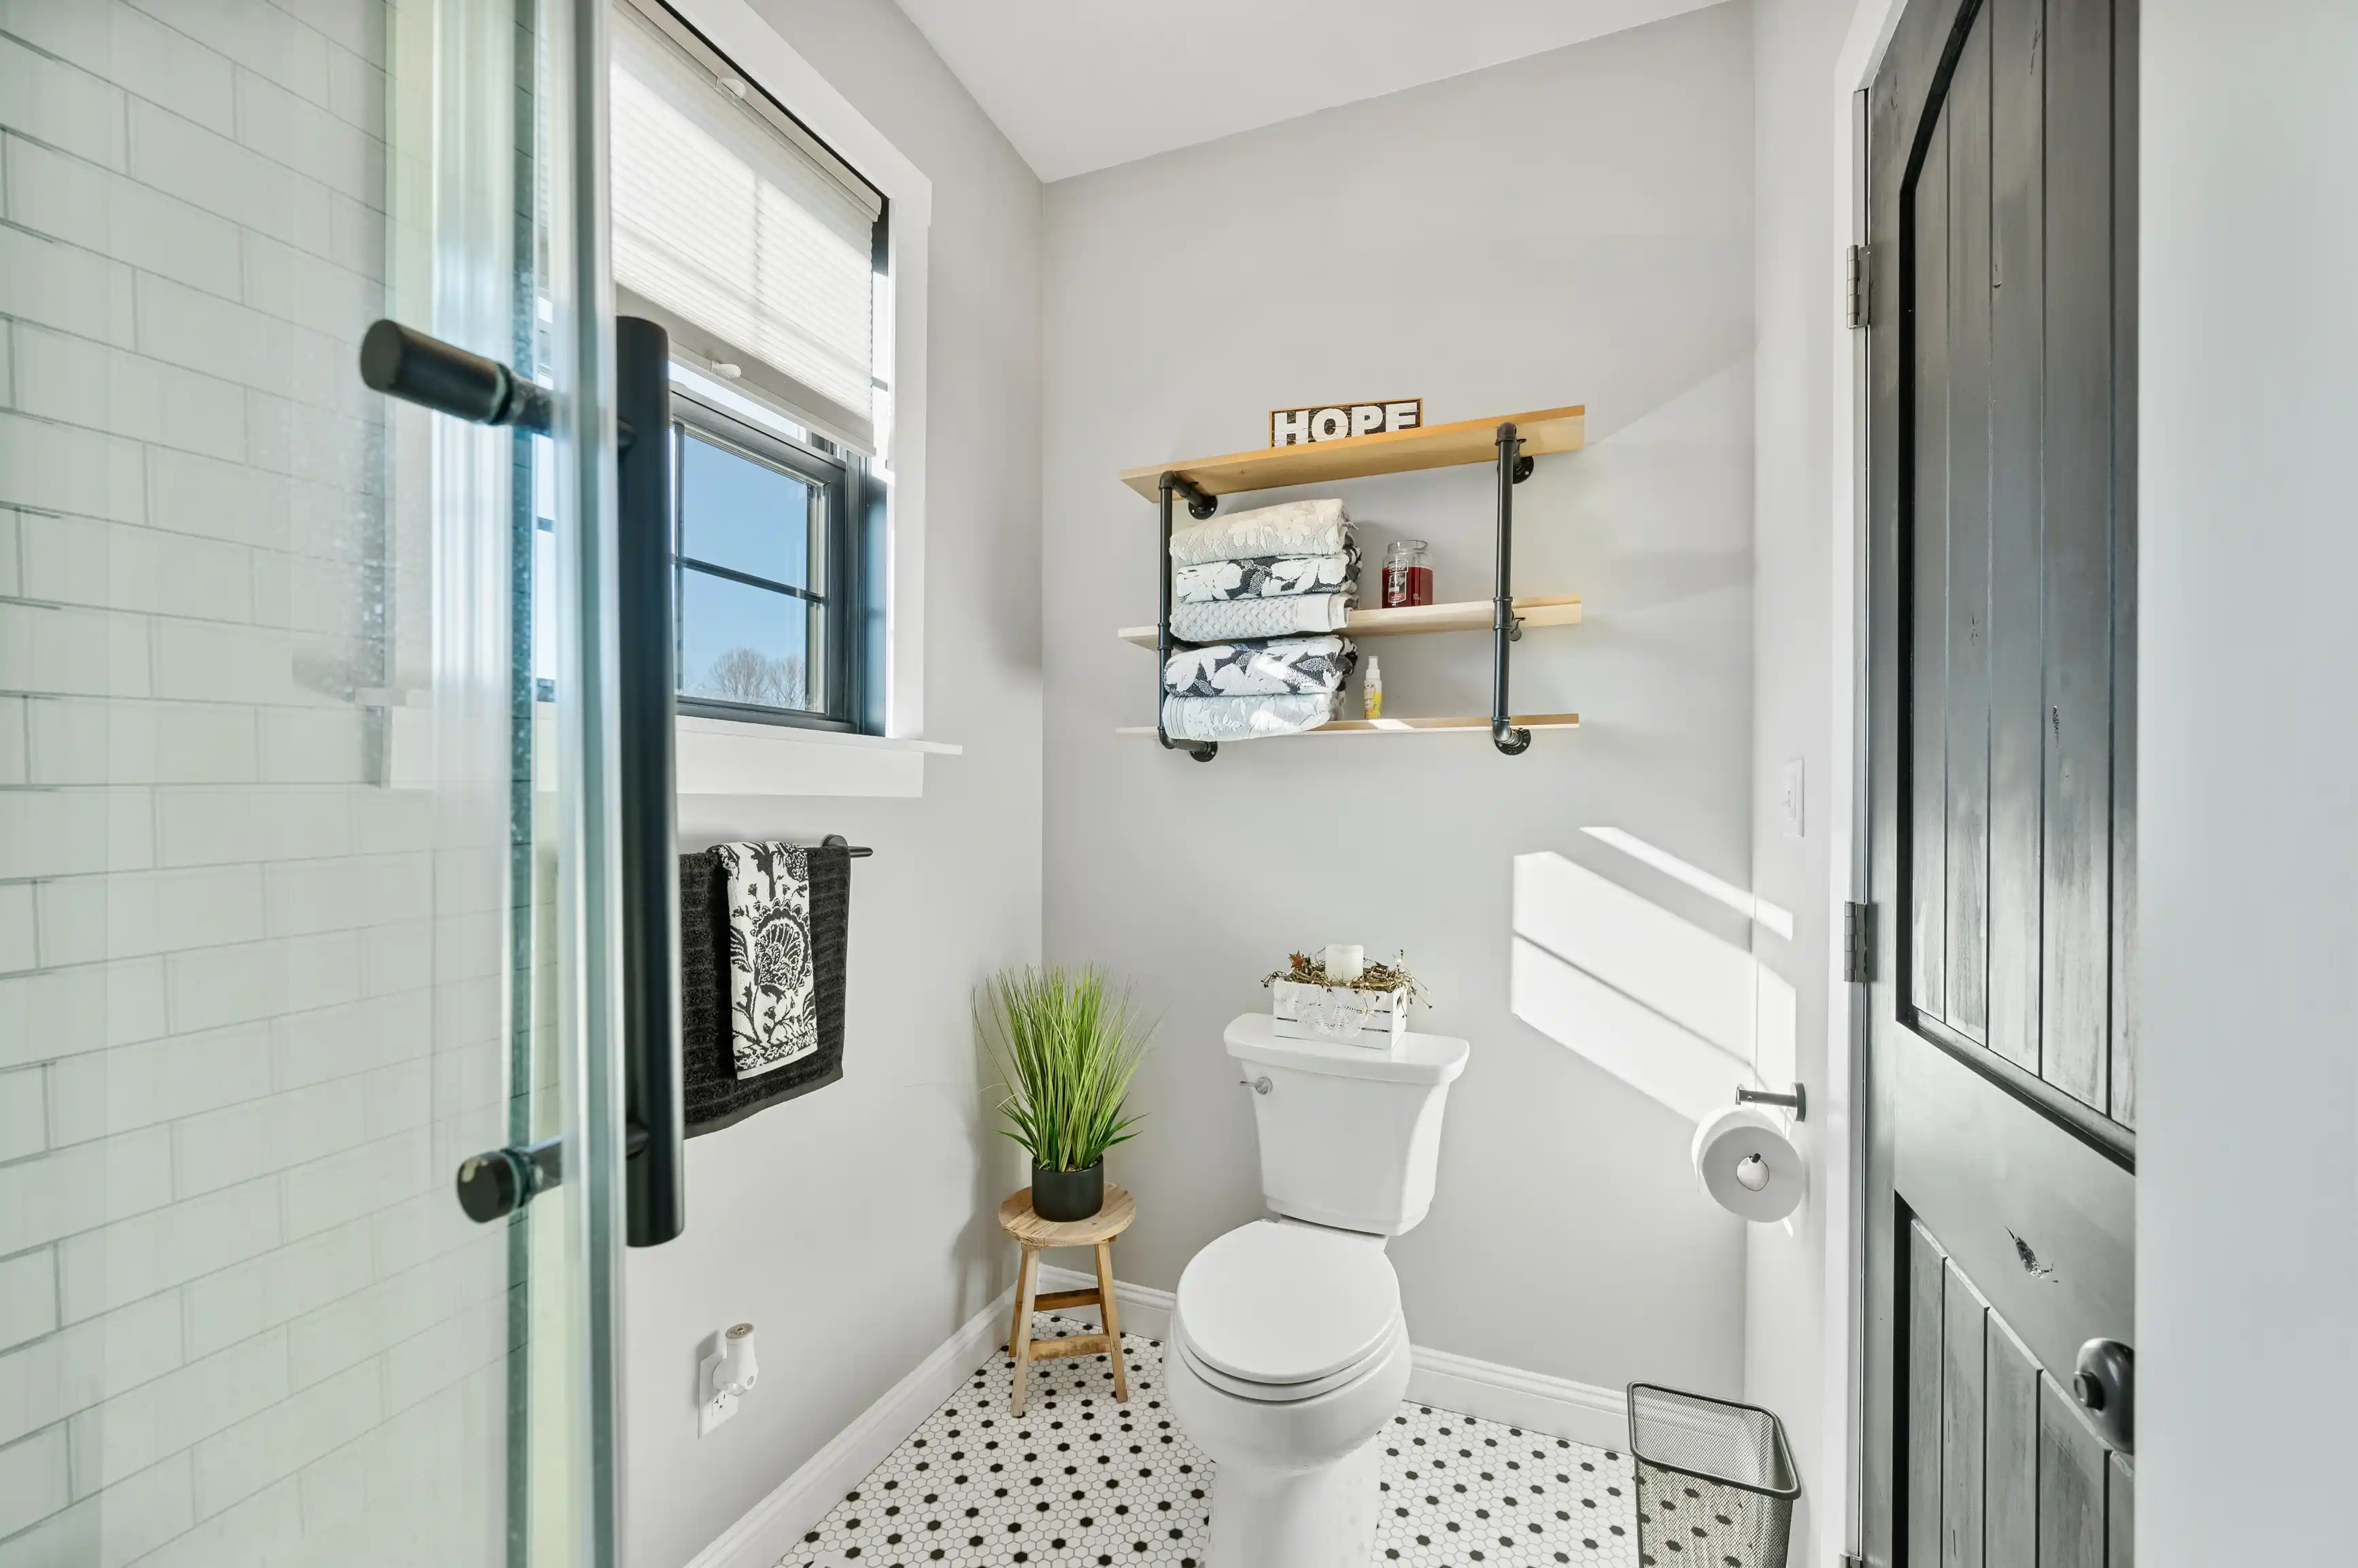 Brightly lit bathroom interior with glass shower door, white subway tiles, floating wooden shelves with towels, 'HOPE' sign, toilet, and plant decor.